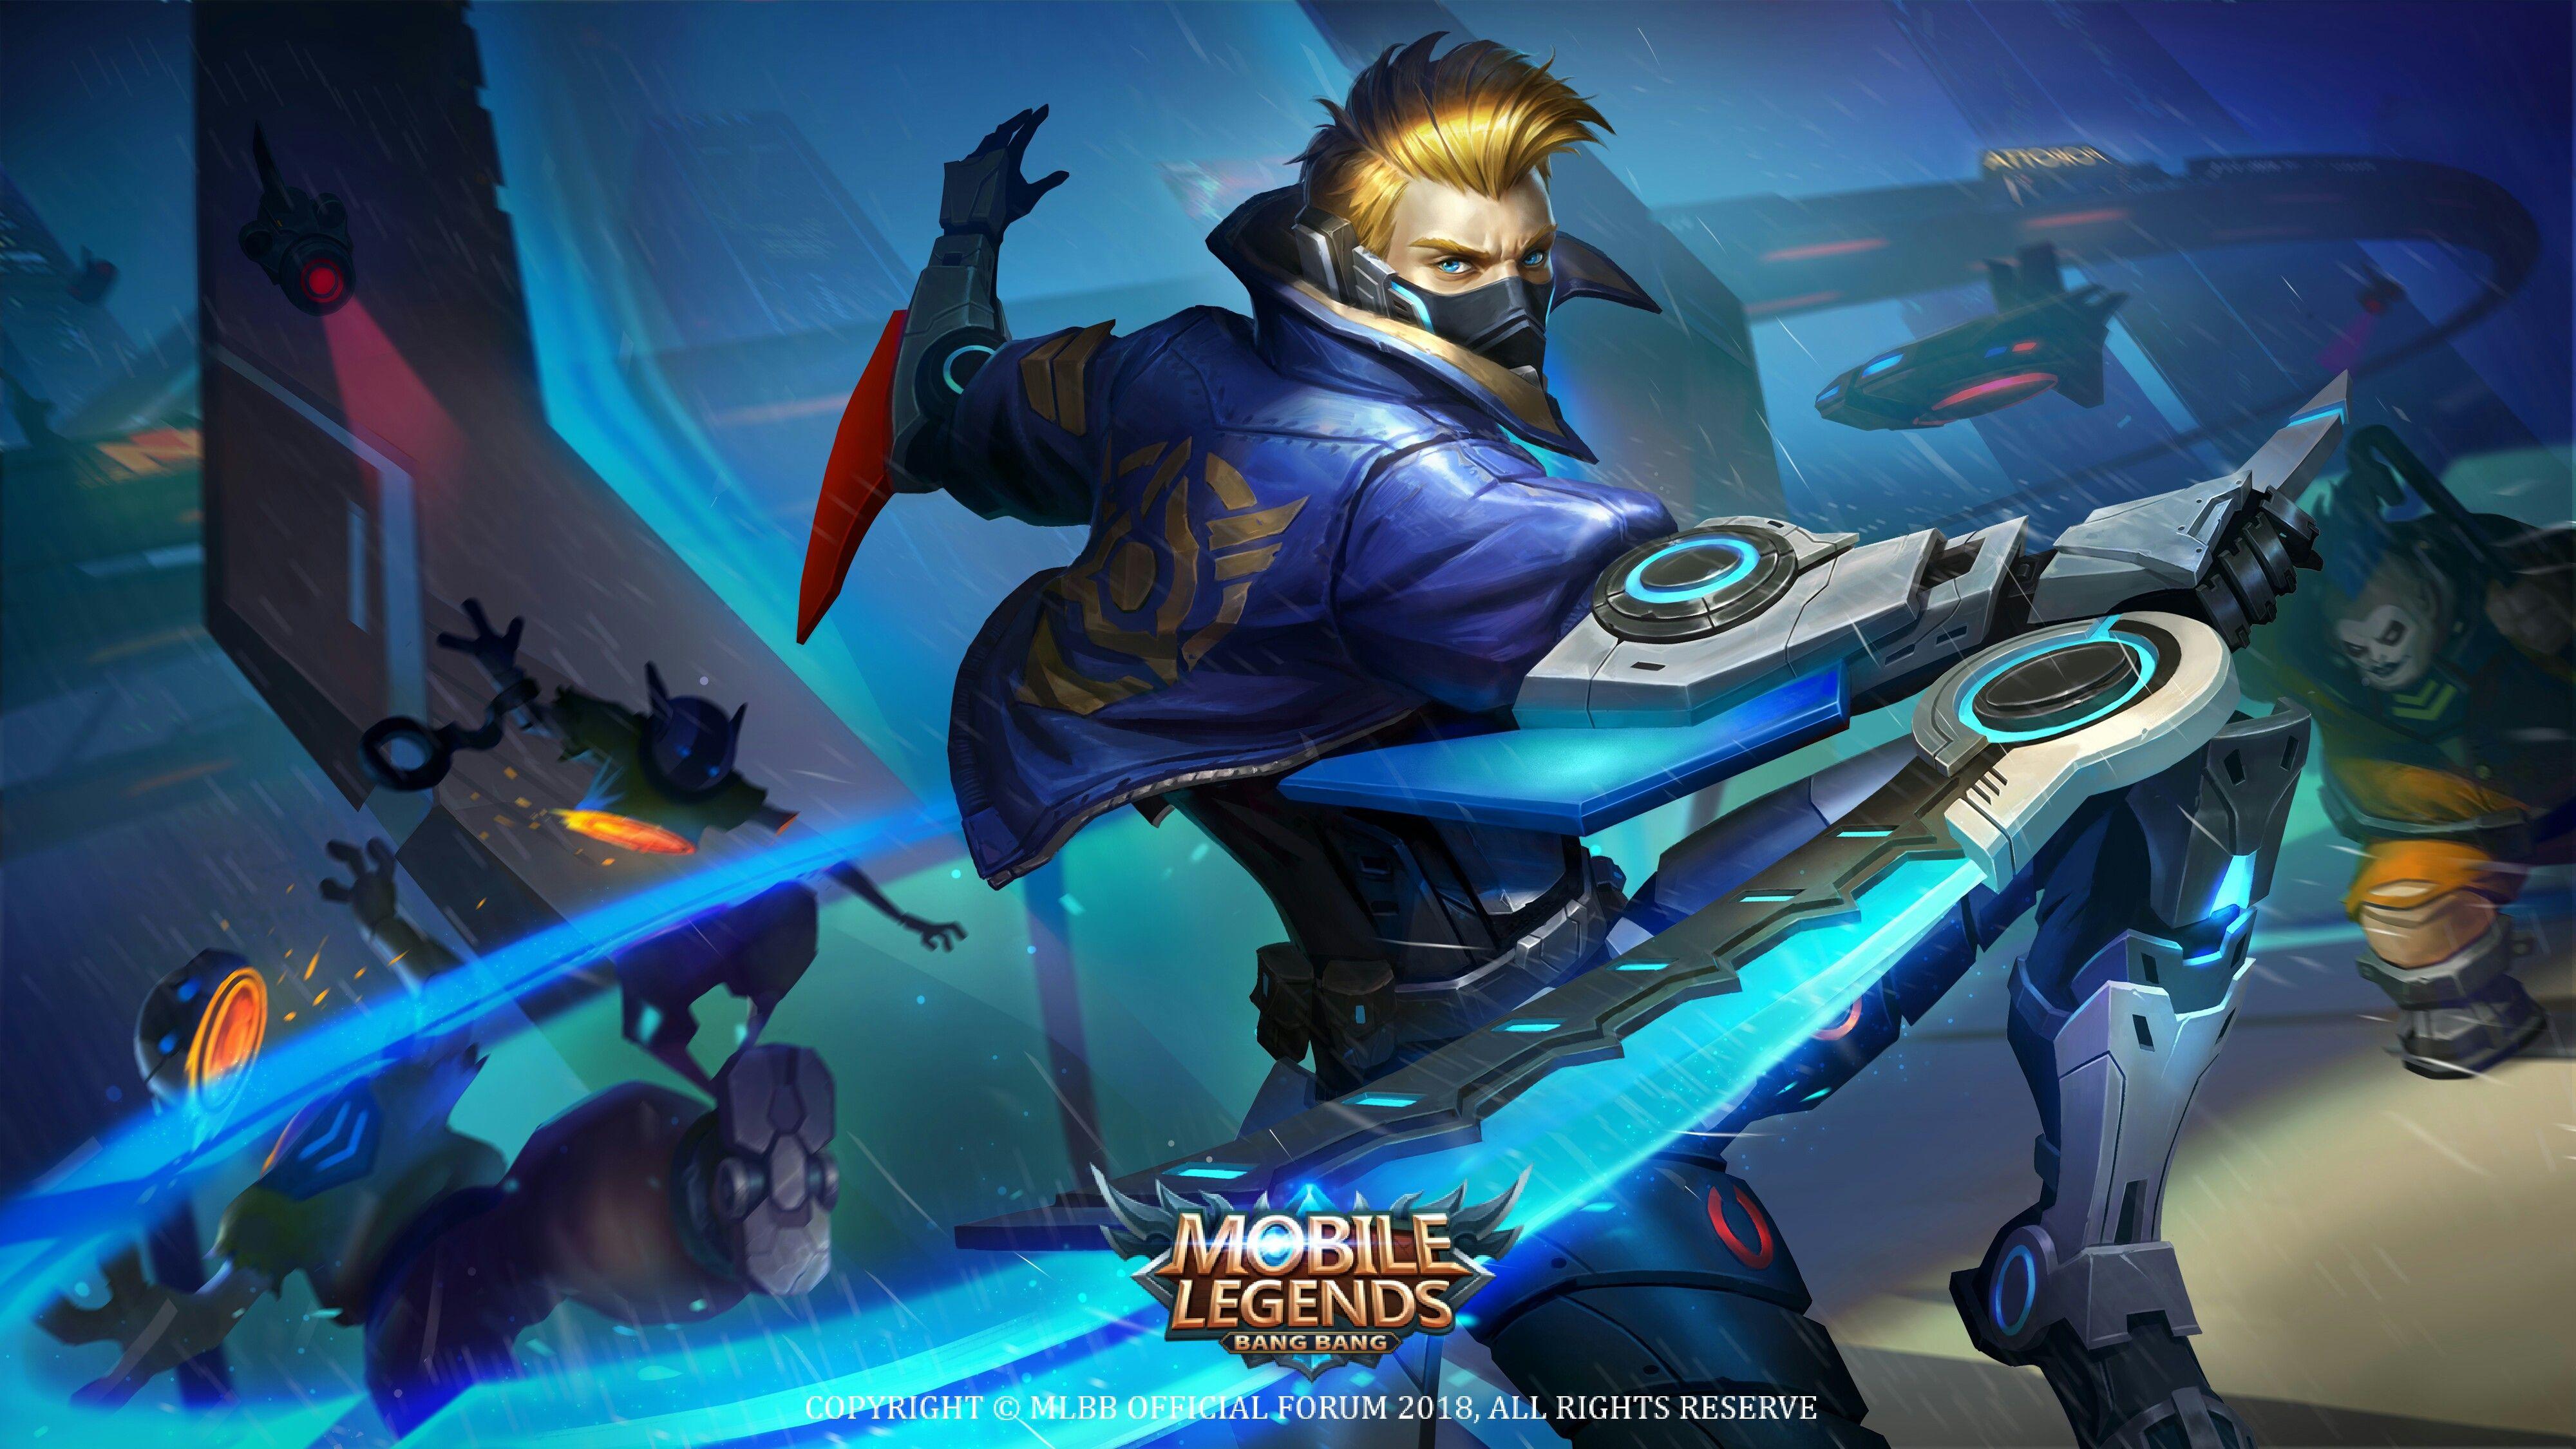 Hd Wallpapers Mobile Legends